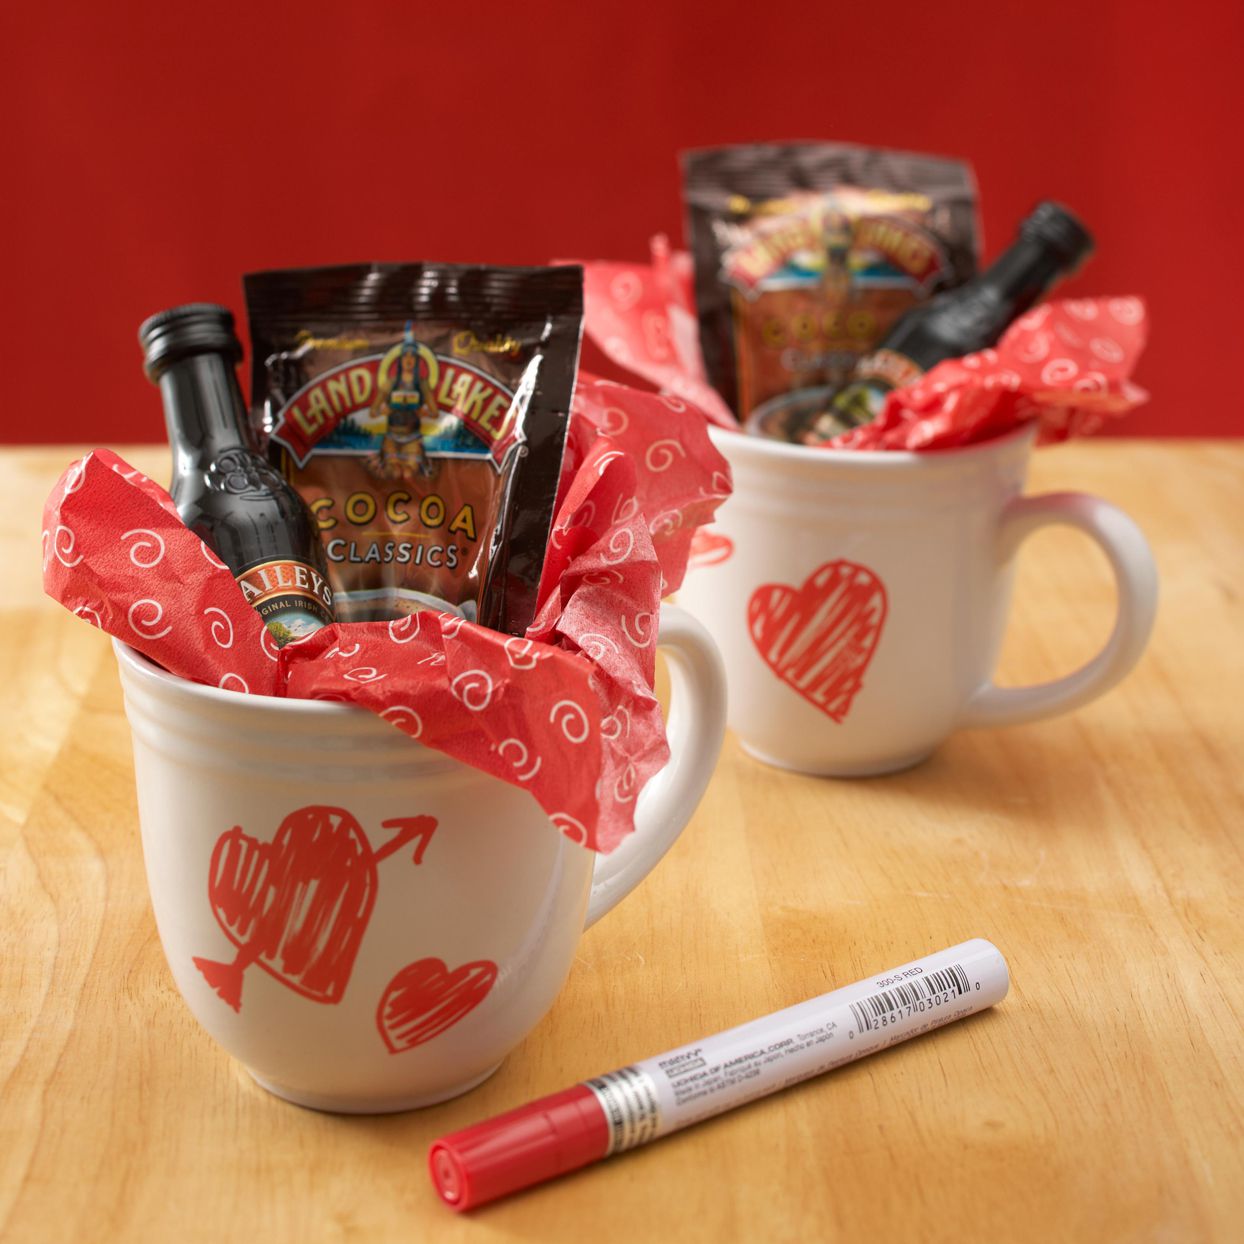 Hot Chocolate Date with Personalized Mugs